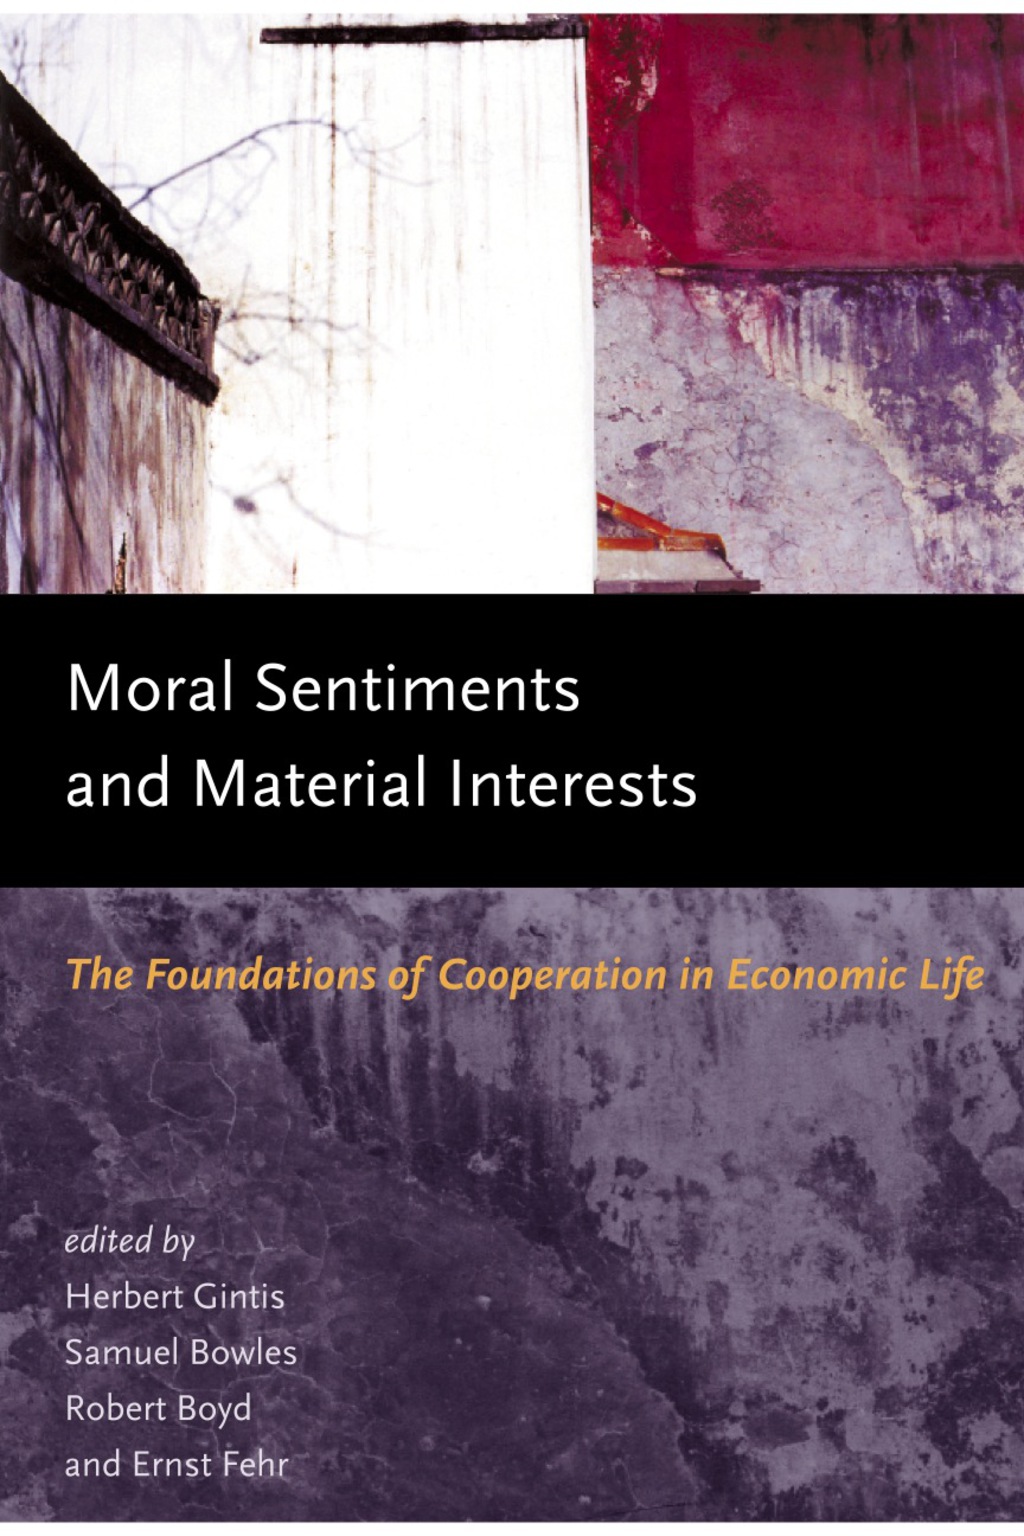 Moral Sentiments and Material Interests (eBook) - Herbert Gintis